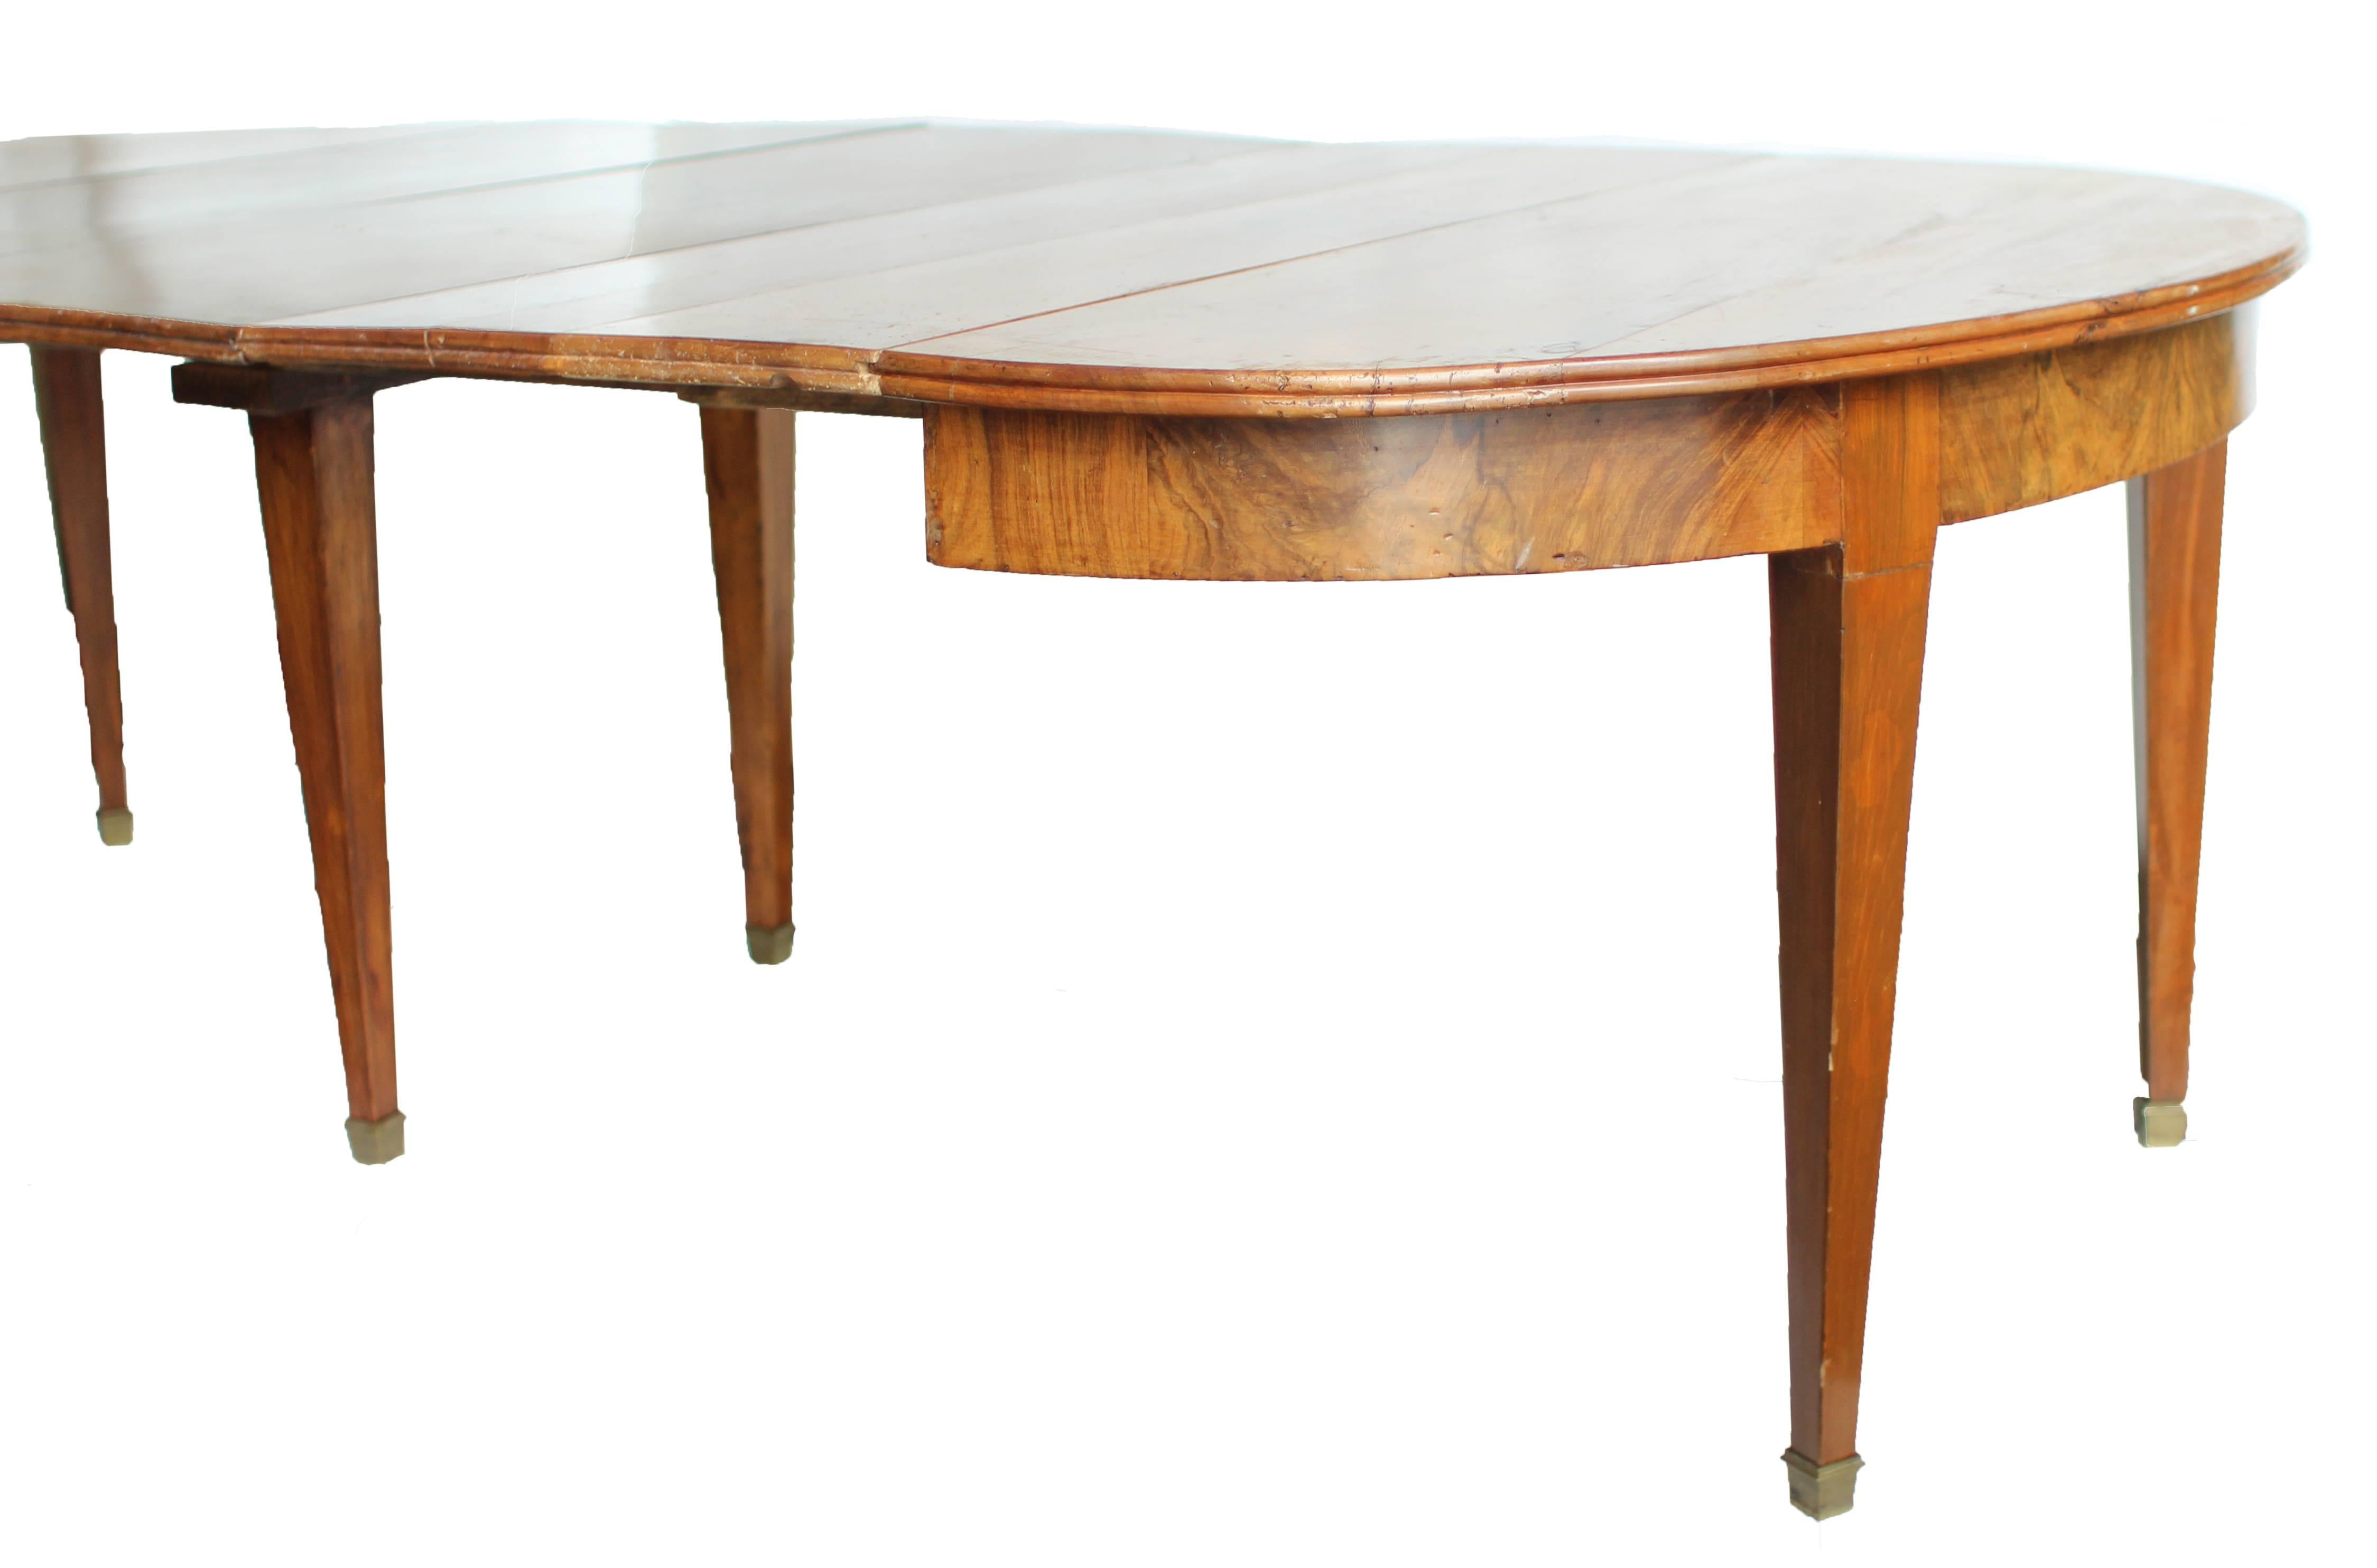 French 19c Directoire Walnut Dining Table w/ Three Leaves